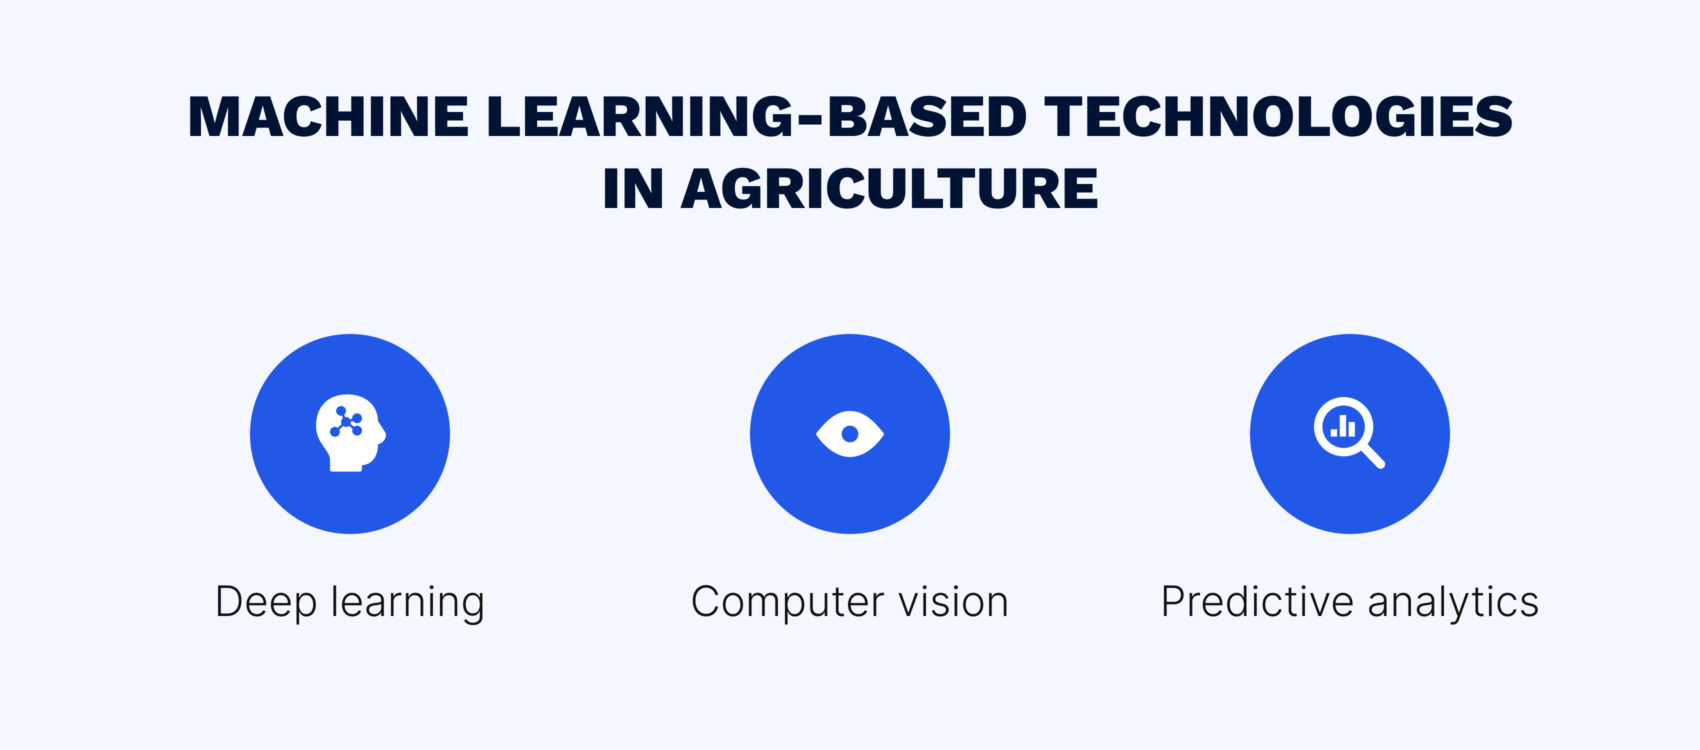 What technologies are used in ML for smart farming applications